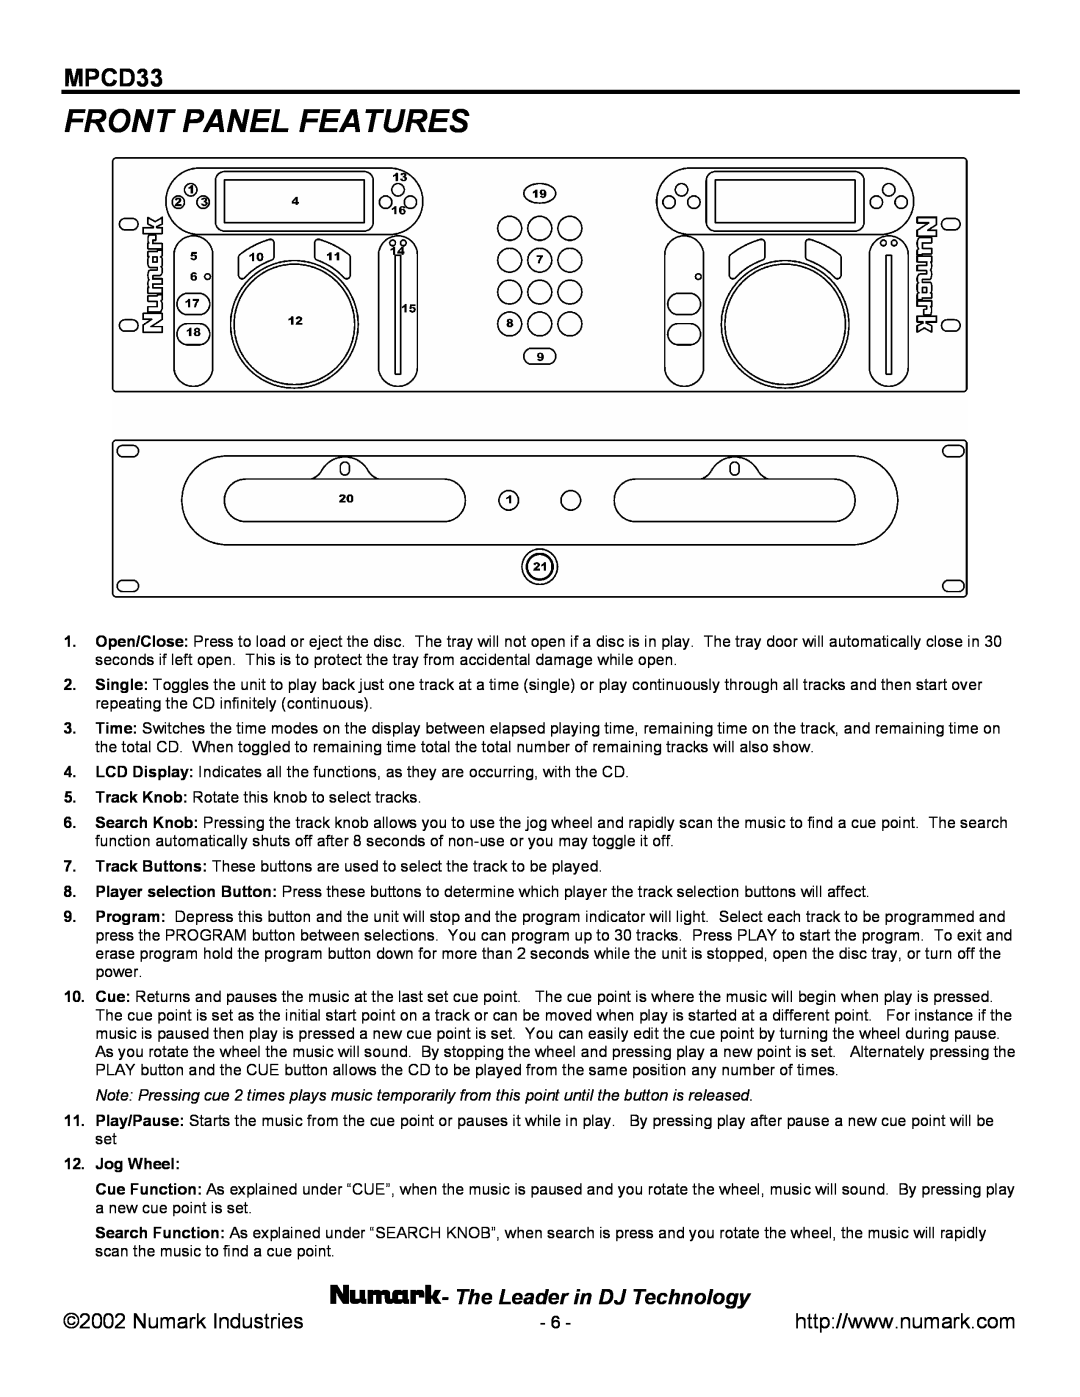 Numark Industries MPCD33 manual Front Panel Features, Numark Industries, The Leader in DJ Technology, Jog Wheel 